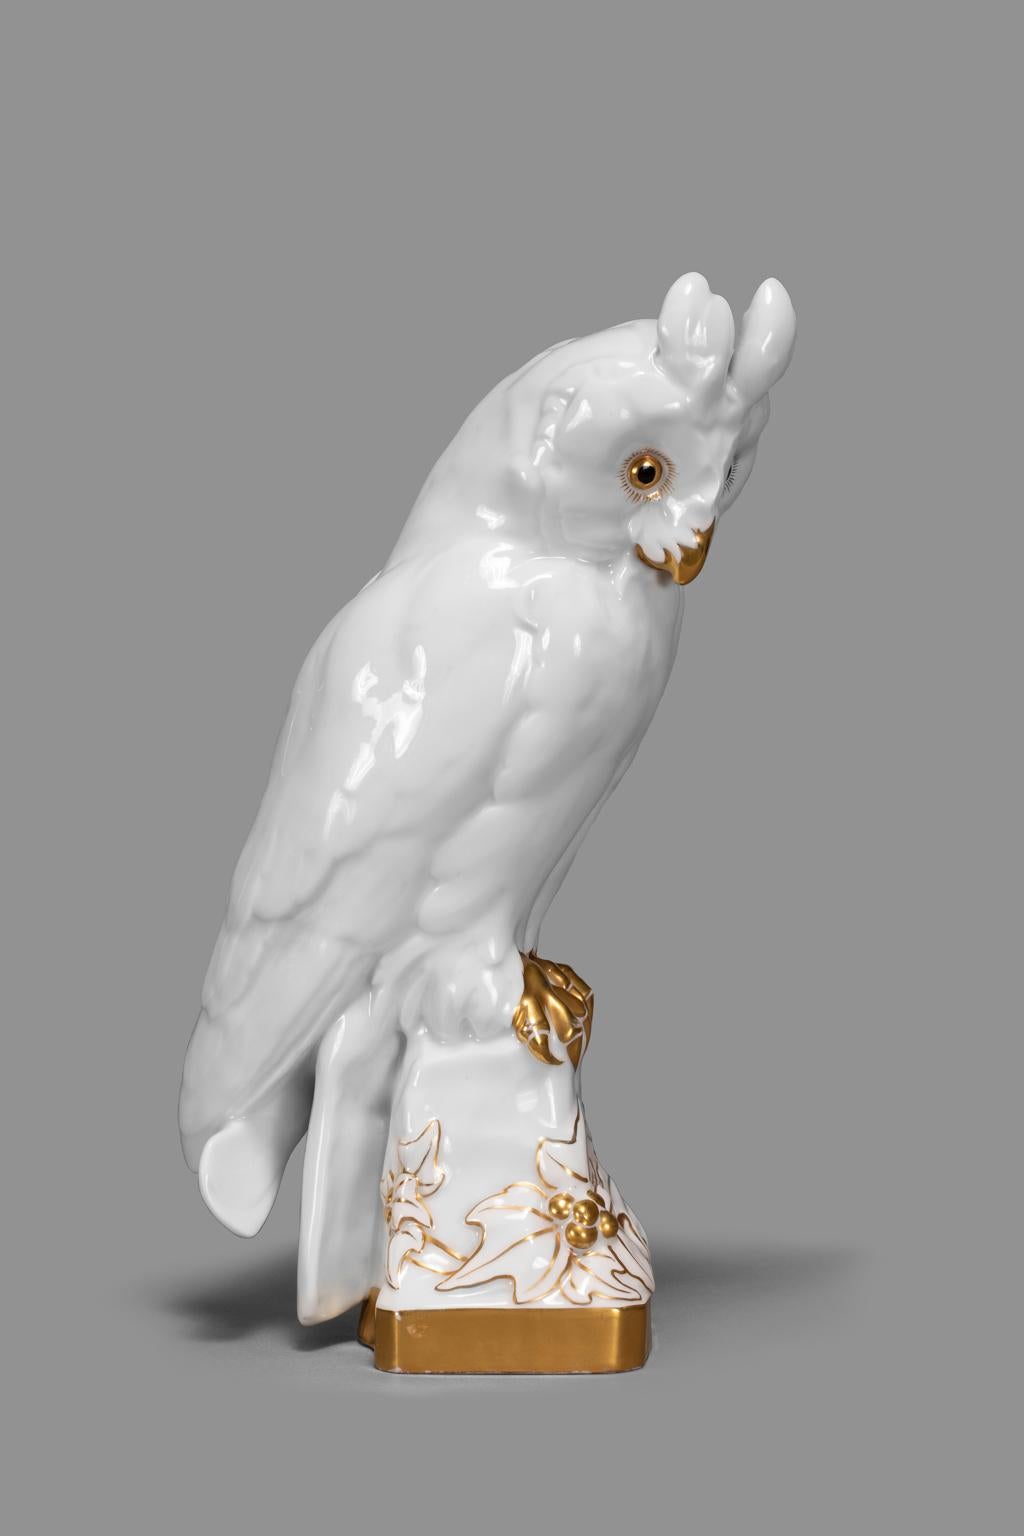 The 24 carat gilded owl was created by Professor Fritz Klee around 1920 for Hutschenreuther Porcelain. This beautifully crafted piece is unusual in that surrounding the base are opened decorative poinsettia flowers. There are two very old stamps on